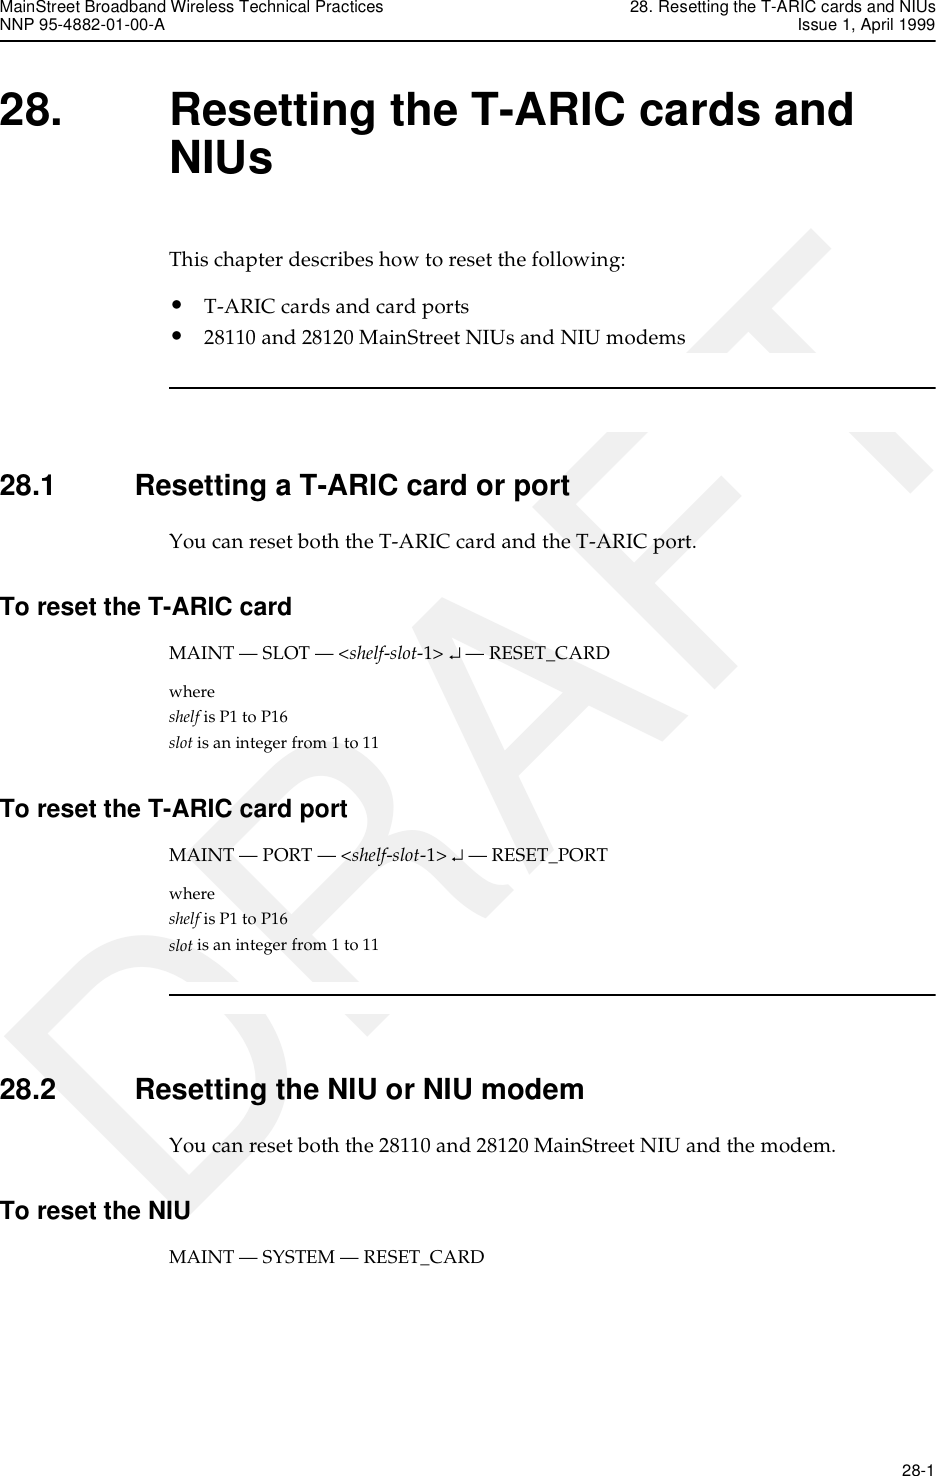 MainStreet Broadband Wireless Technical Practices 28. Resetting the T-ARIC cards and NIUsNNP 95-4882-01-00-A Issue 1, April 1999   28-1DRAFT28. Resetting the T-ARIC cards and NIUsThis chapter describes how to reset the following:• T-ARIC cards and card ports• 28110 and 28120 MainStreet NIUs and NIU modems28.1 Resetting a T-ARIC card or portYou can reset both the T-ARIC card and the T-ARIC port.To reset the T-ARIC card MAINT — SLOT — &lt;shelf-slot-1&gt; ↵ — RESET_CARDwhere shelf is P1 to P16slot is an integer from 1 to 11To reset the T-ARIC card portMAINT — PORT — &lt;shelf-slot-1&gt; ↵ — RESET_PORTwhere shelf is P1 to P16slot is an integer from 1 to 1128.2 Resetting the NIU or NIU modemYou can reset both the 28110 and 28120 MainStreet NIU and the modem.To reset the NIUMAINT — SYSTEM — RESET_CARD